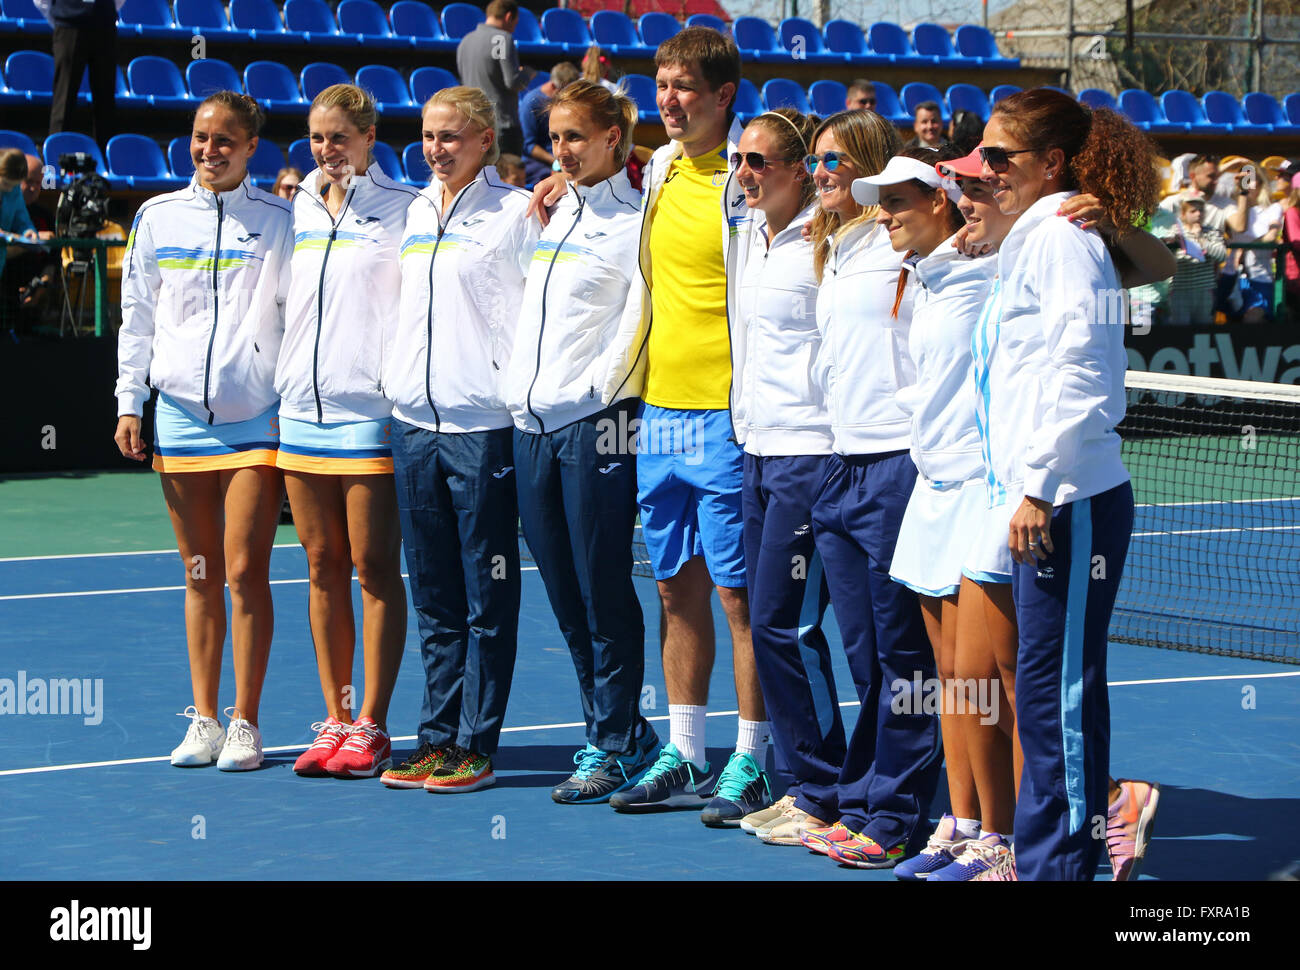 Kyiv, Ukraine. 17th April, 2016. Ukraine and Argentina National Teams pose for a group photo after BNP Paribas FedCup match against Argentina at Campa Bucha Tennis Club in Kyiv, Ukraine. Ukraine won 4-0 and entered the 2017 World Group II. Credit:  Oleksandr Prykhodko/Alamy Live News Stock Photo